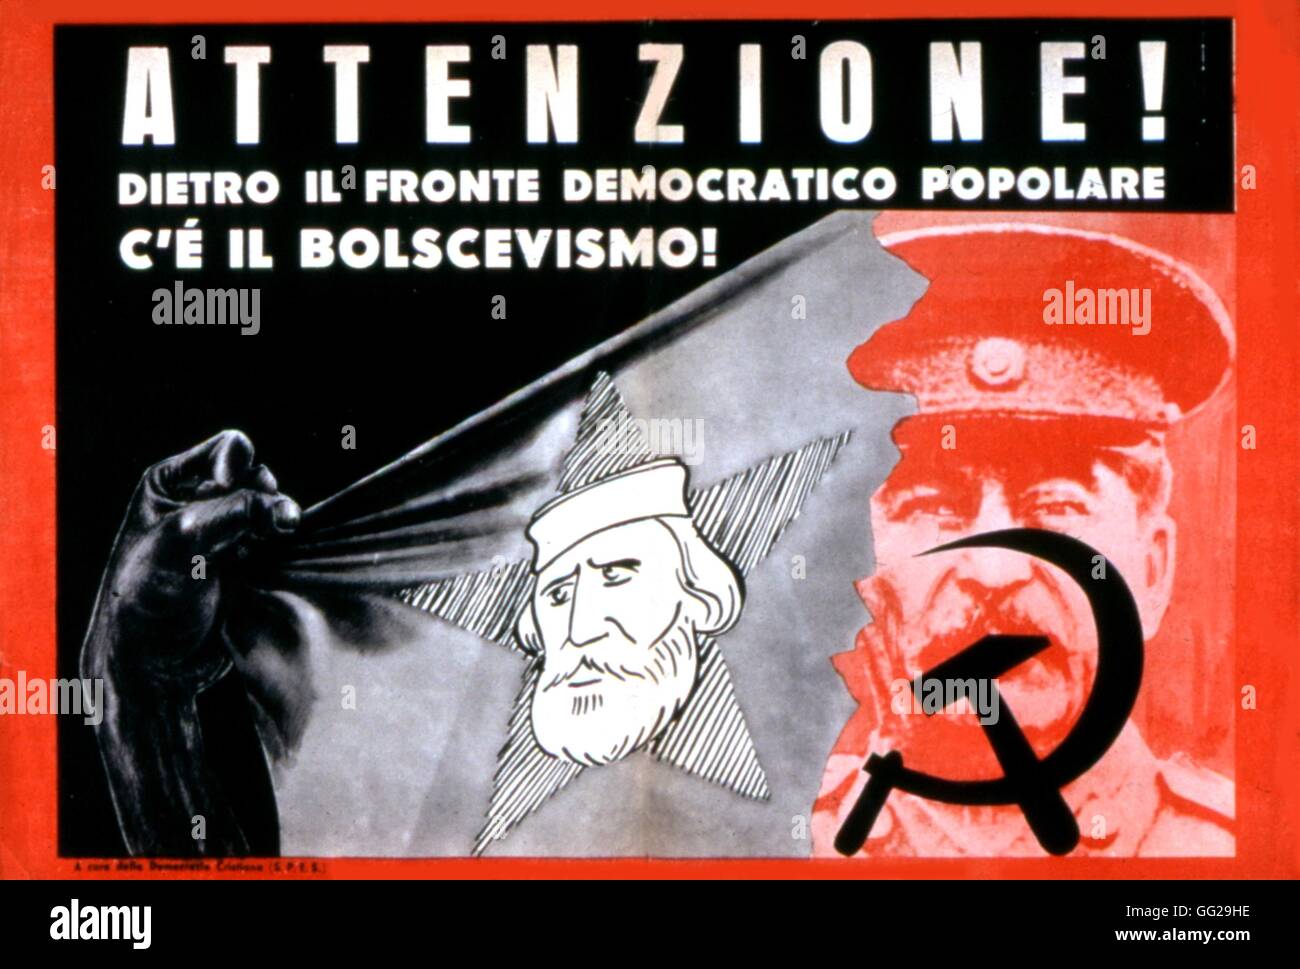 Propaganda election poster issued by the Christian Democracy against the Popular Democratic Front. 'Watch out! Behind the Popular Democratic Front, there is Bolshevism!' 1948 Italy Washington. Library of Congress Stock Photo